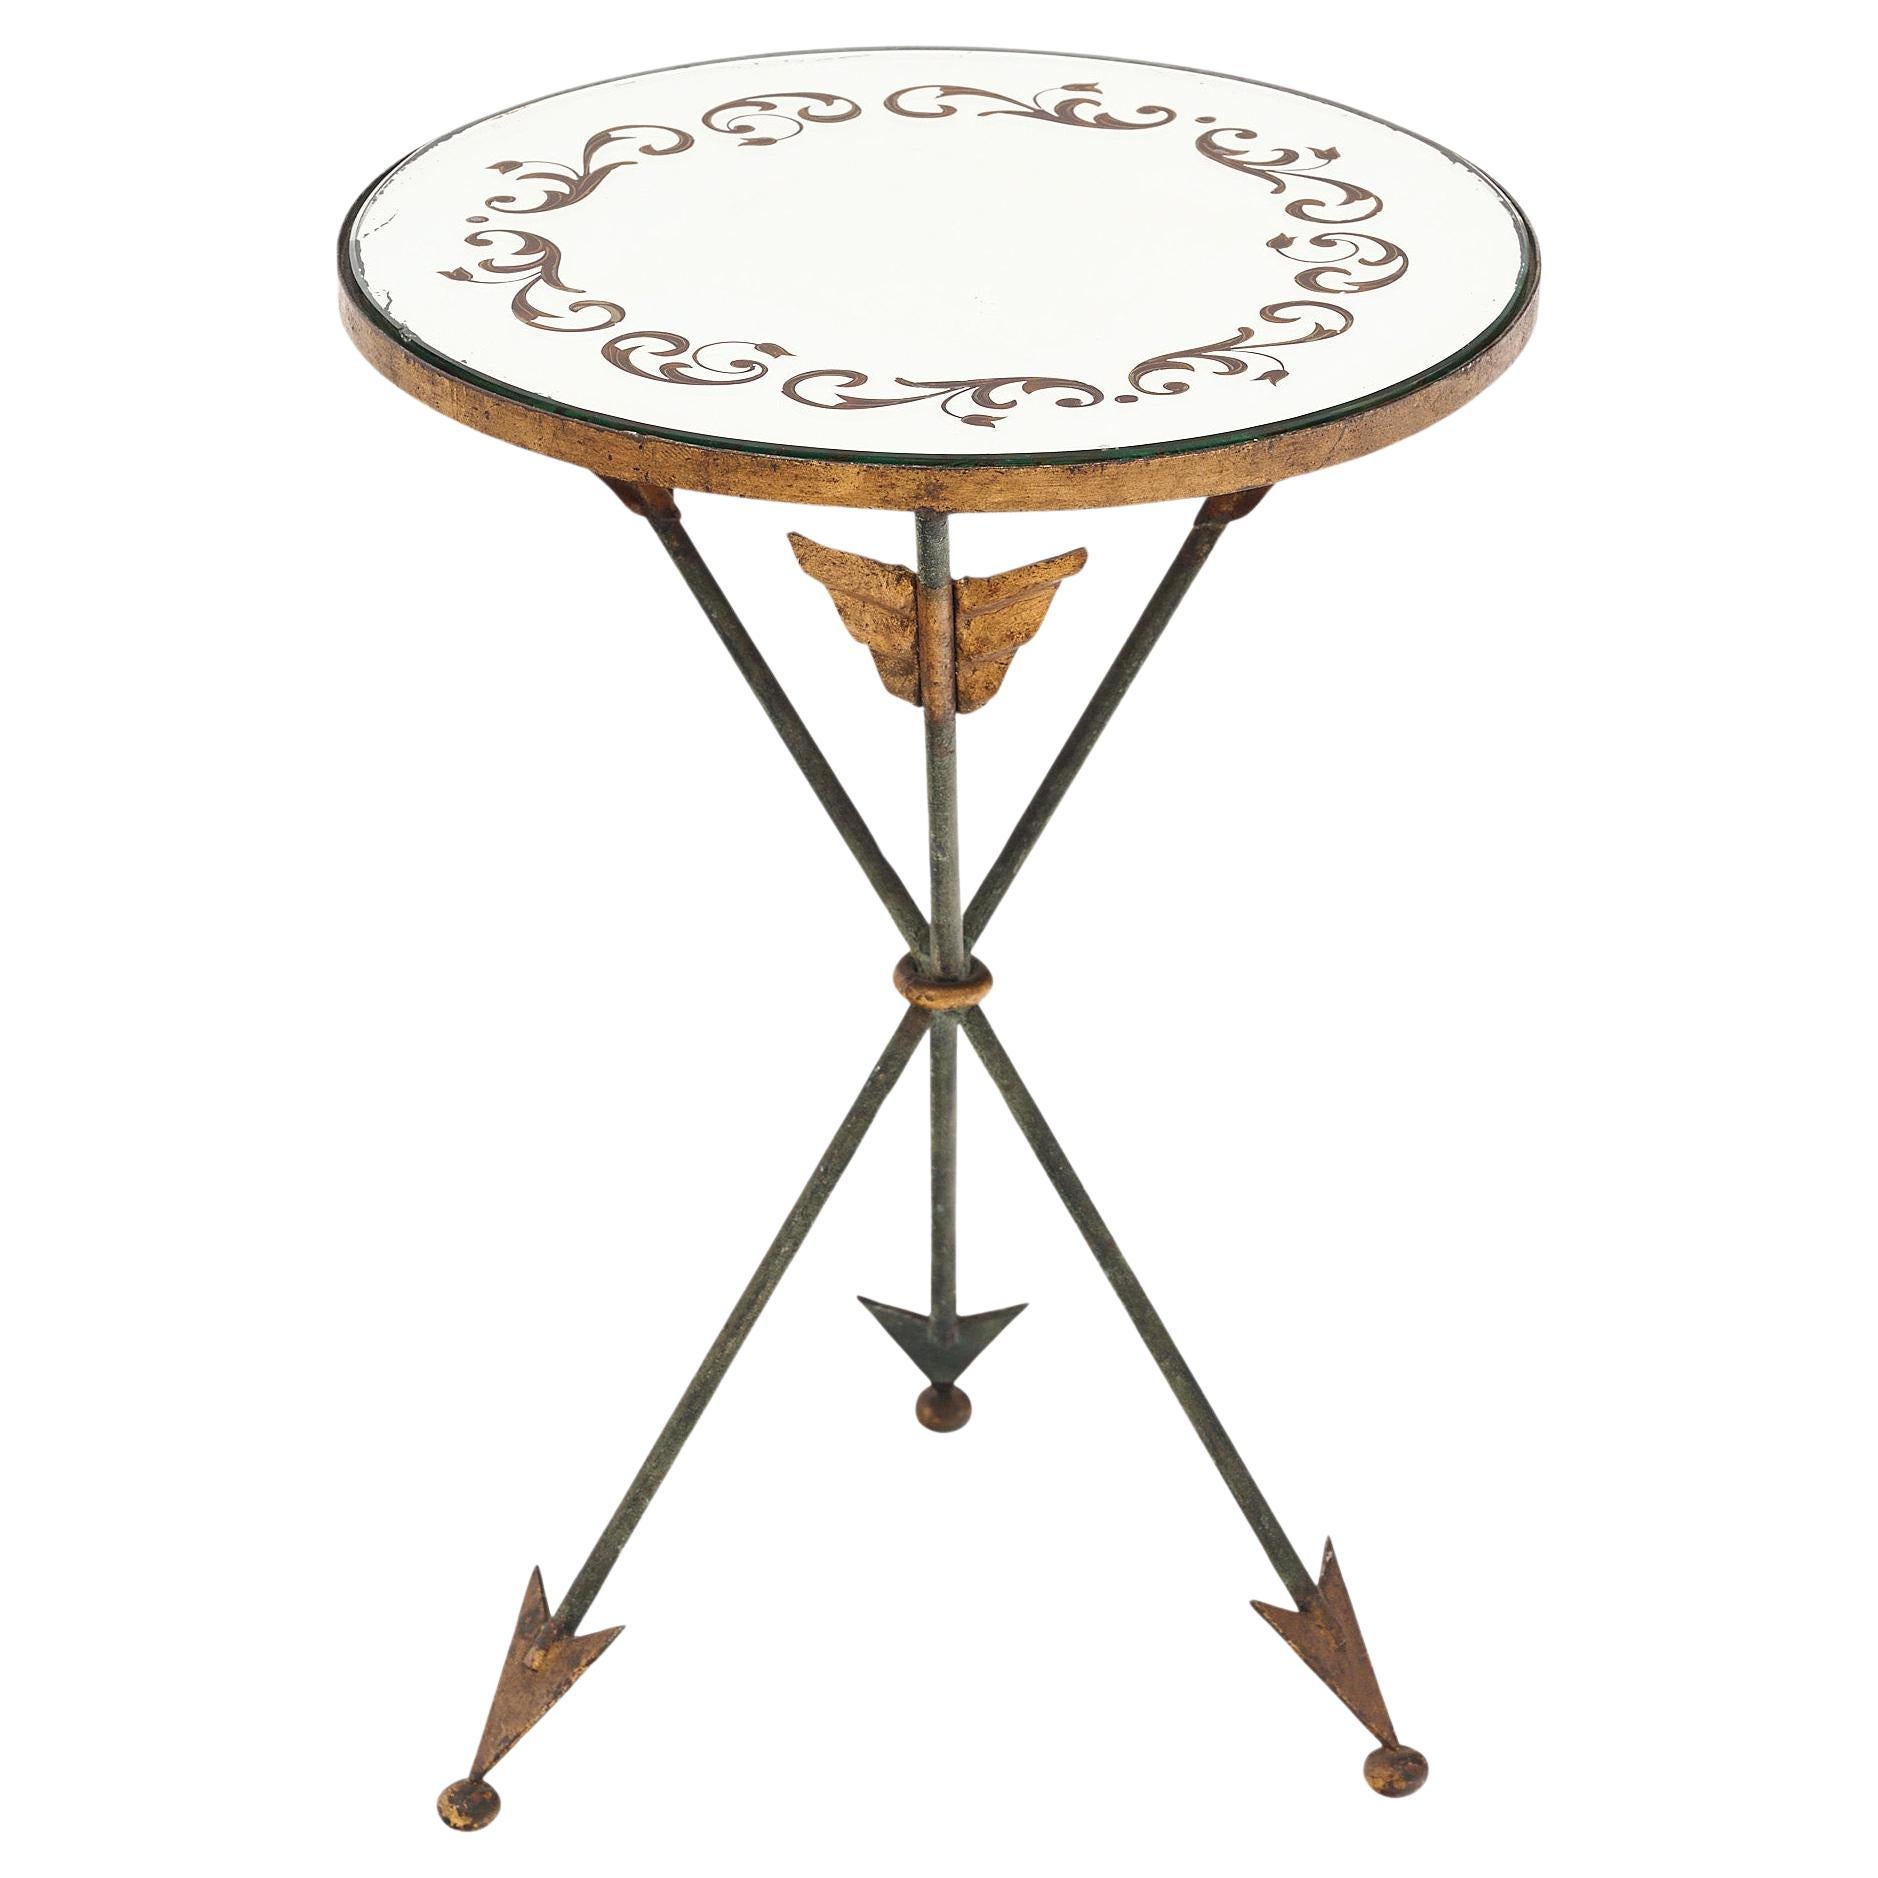 French Art Deco Period Bagues Style Side Table